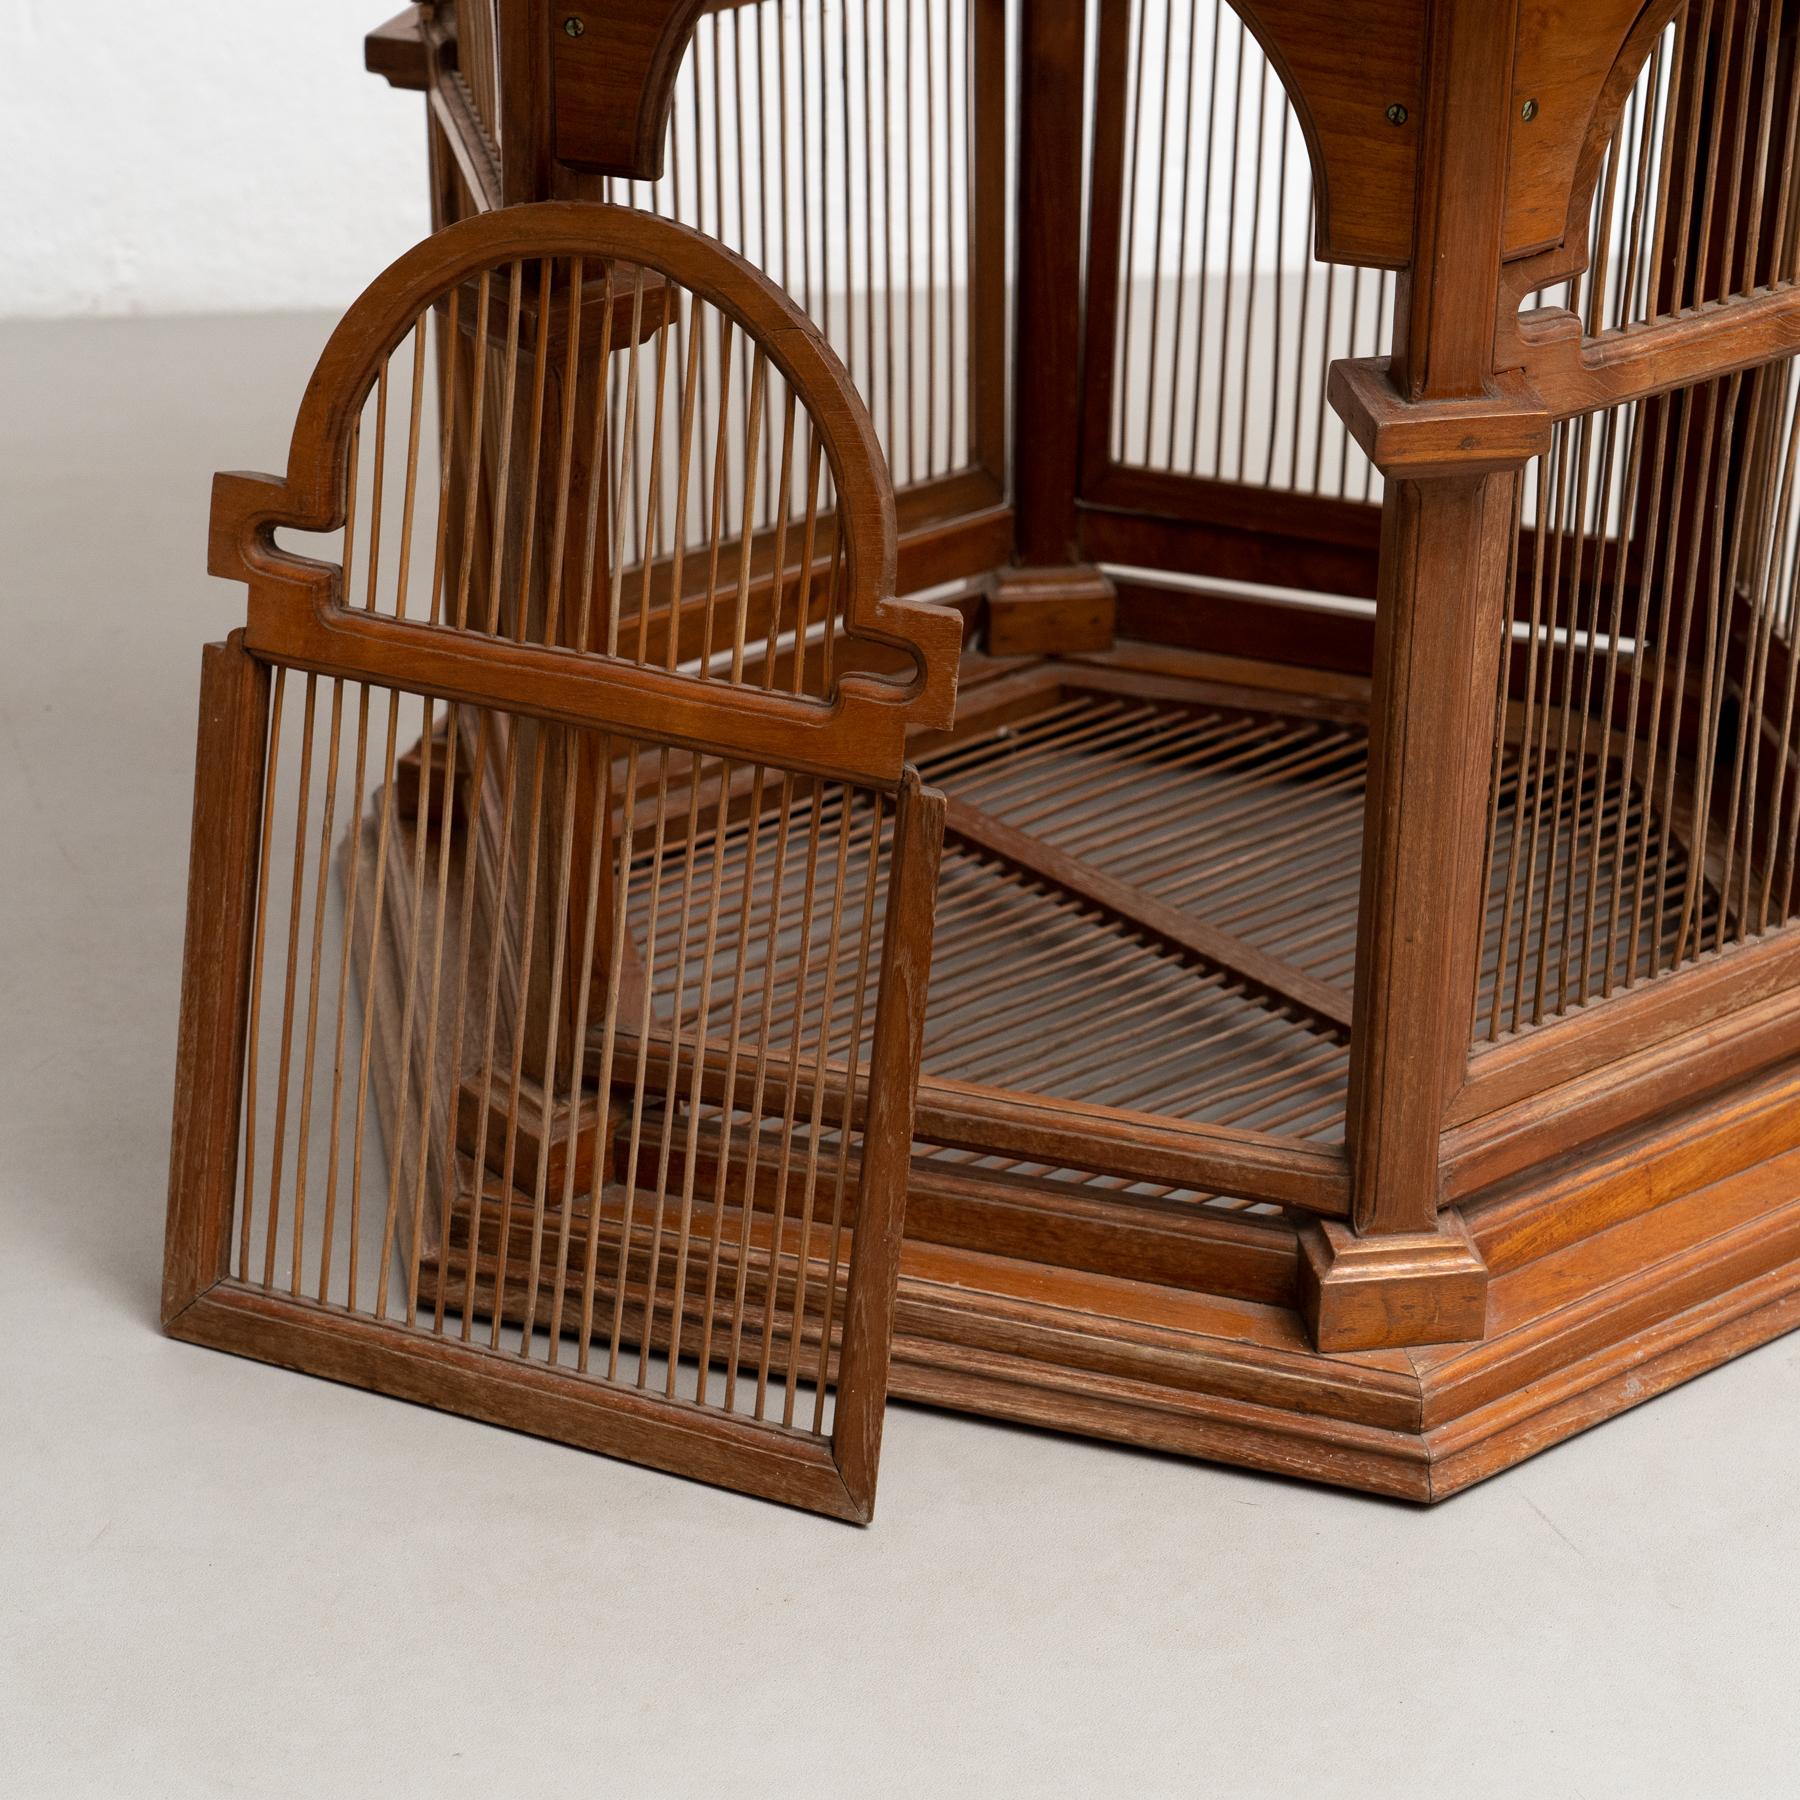 Large Vintage-Style Wooden Cage: Replica of Gaudi's 